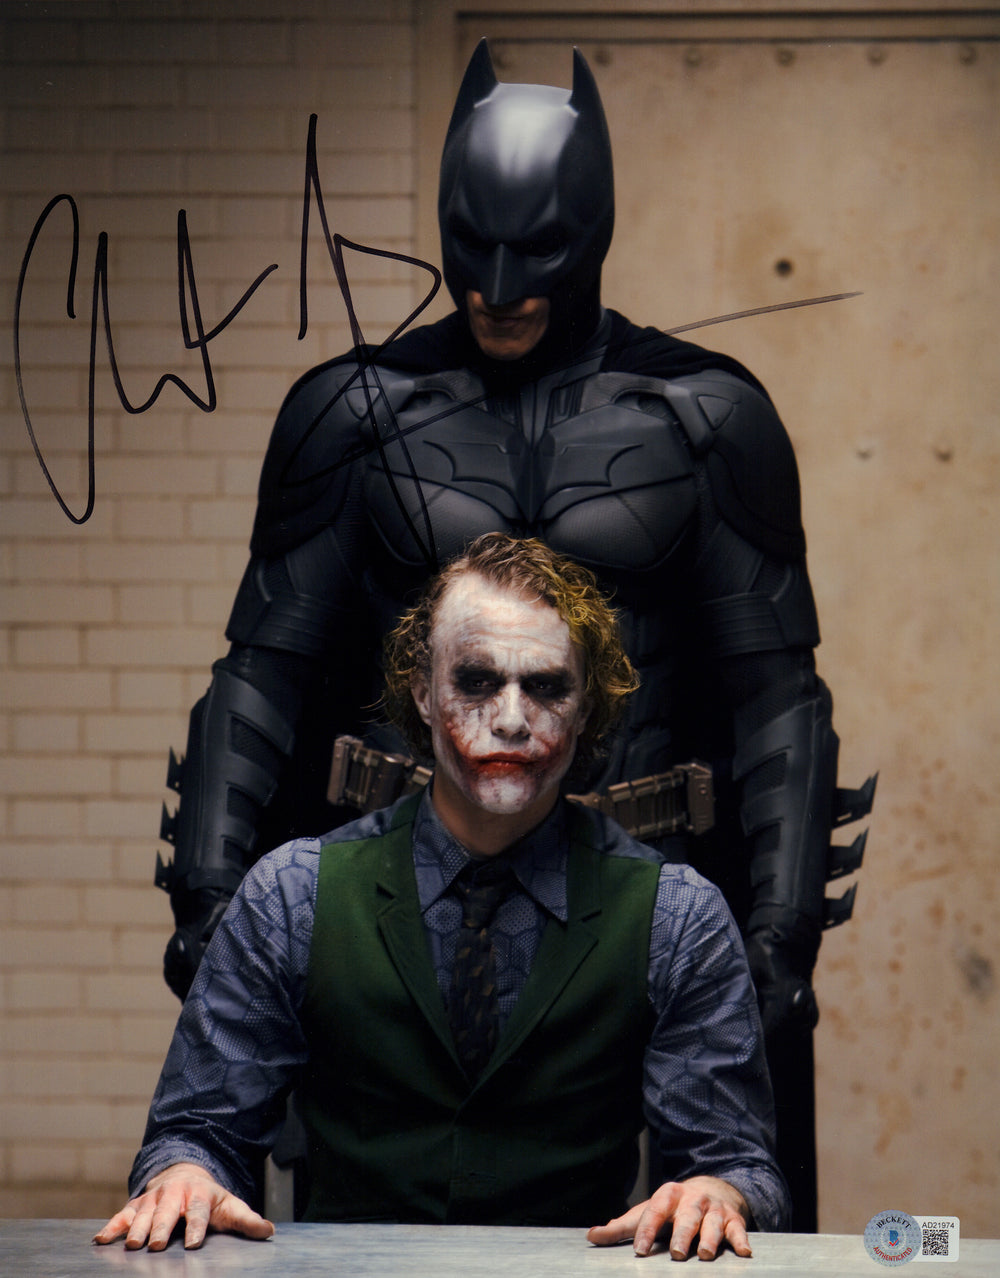 Christian Bale as Batman with The Joker in The Dark Knight Signed 11x14 Photo